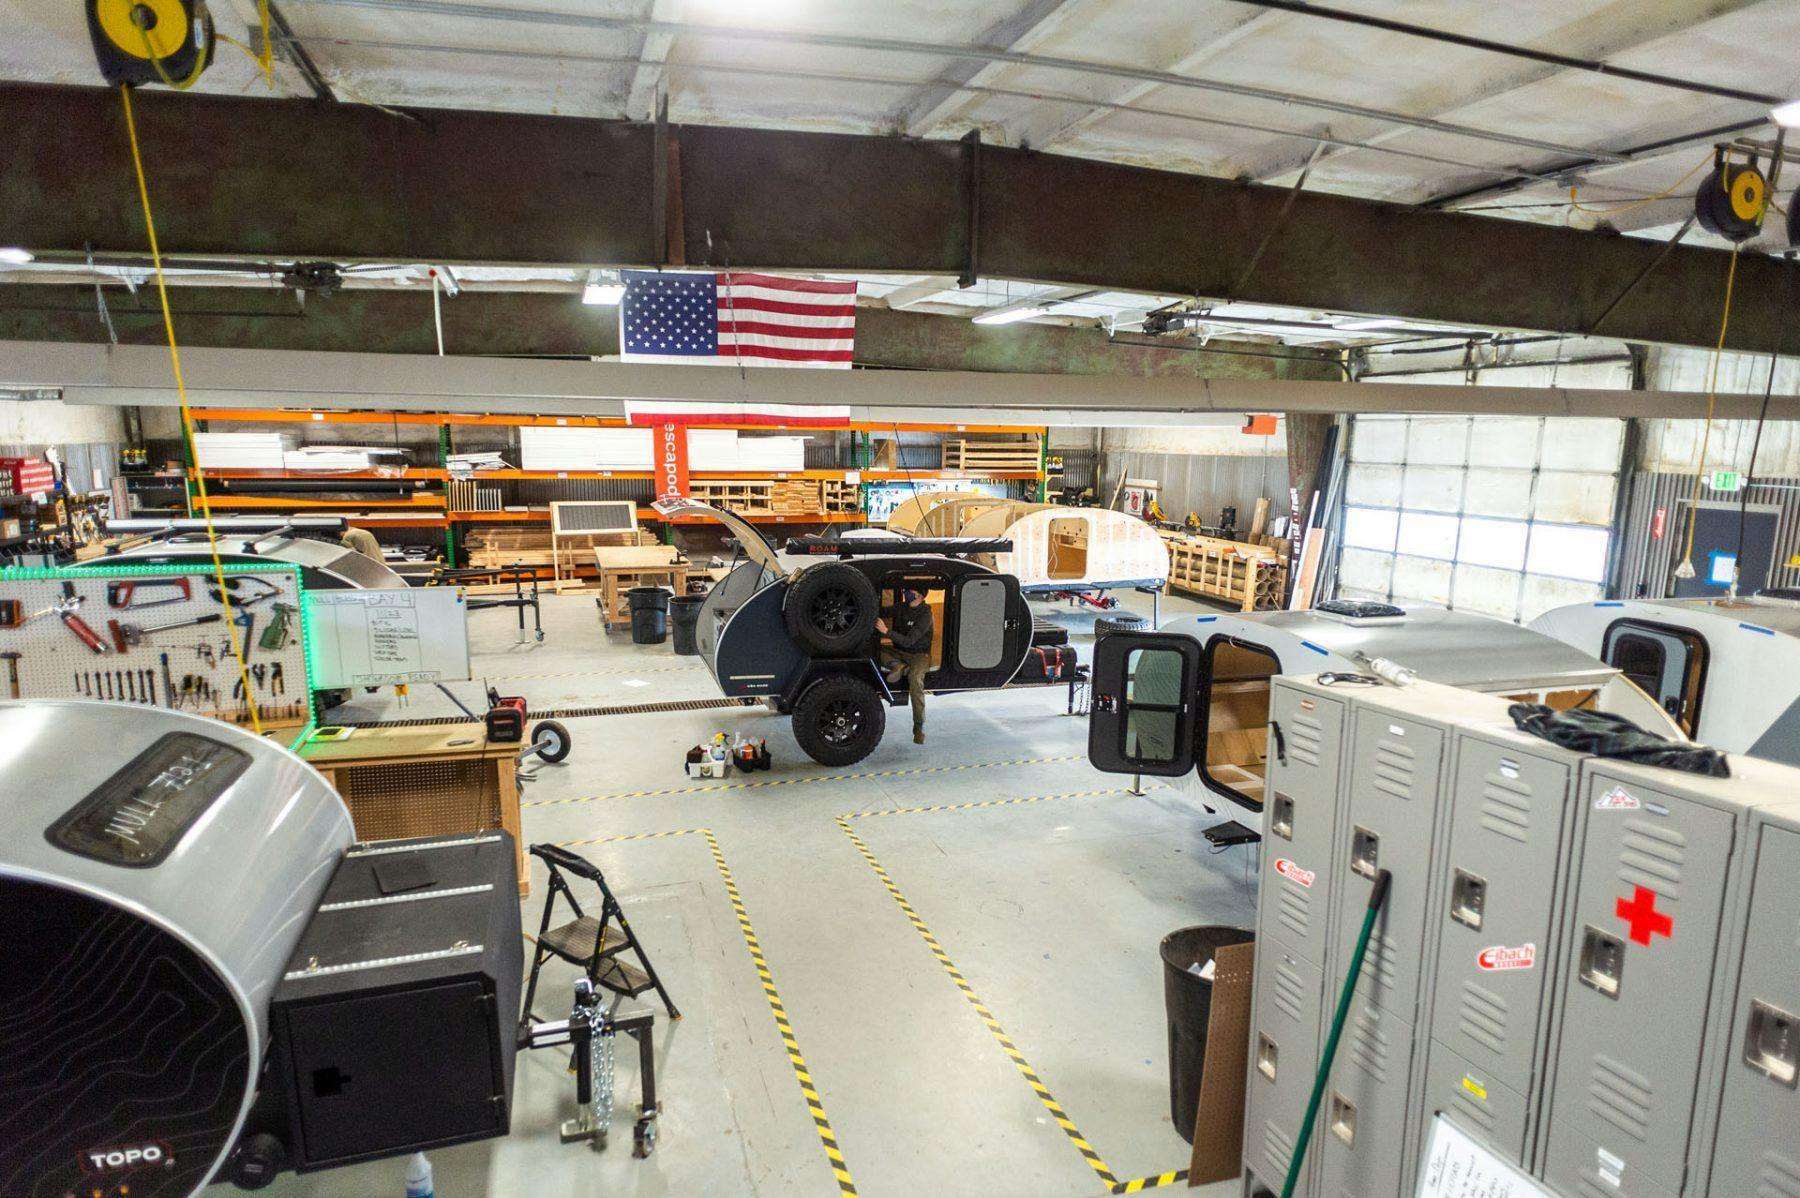 Teardrop campers being manufactured in a small business facility.